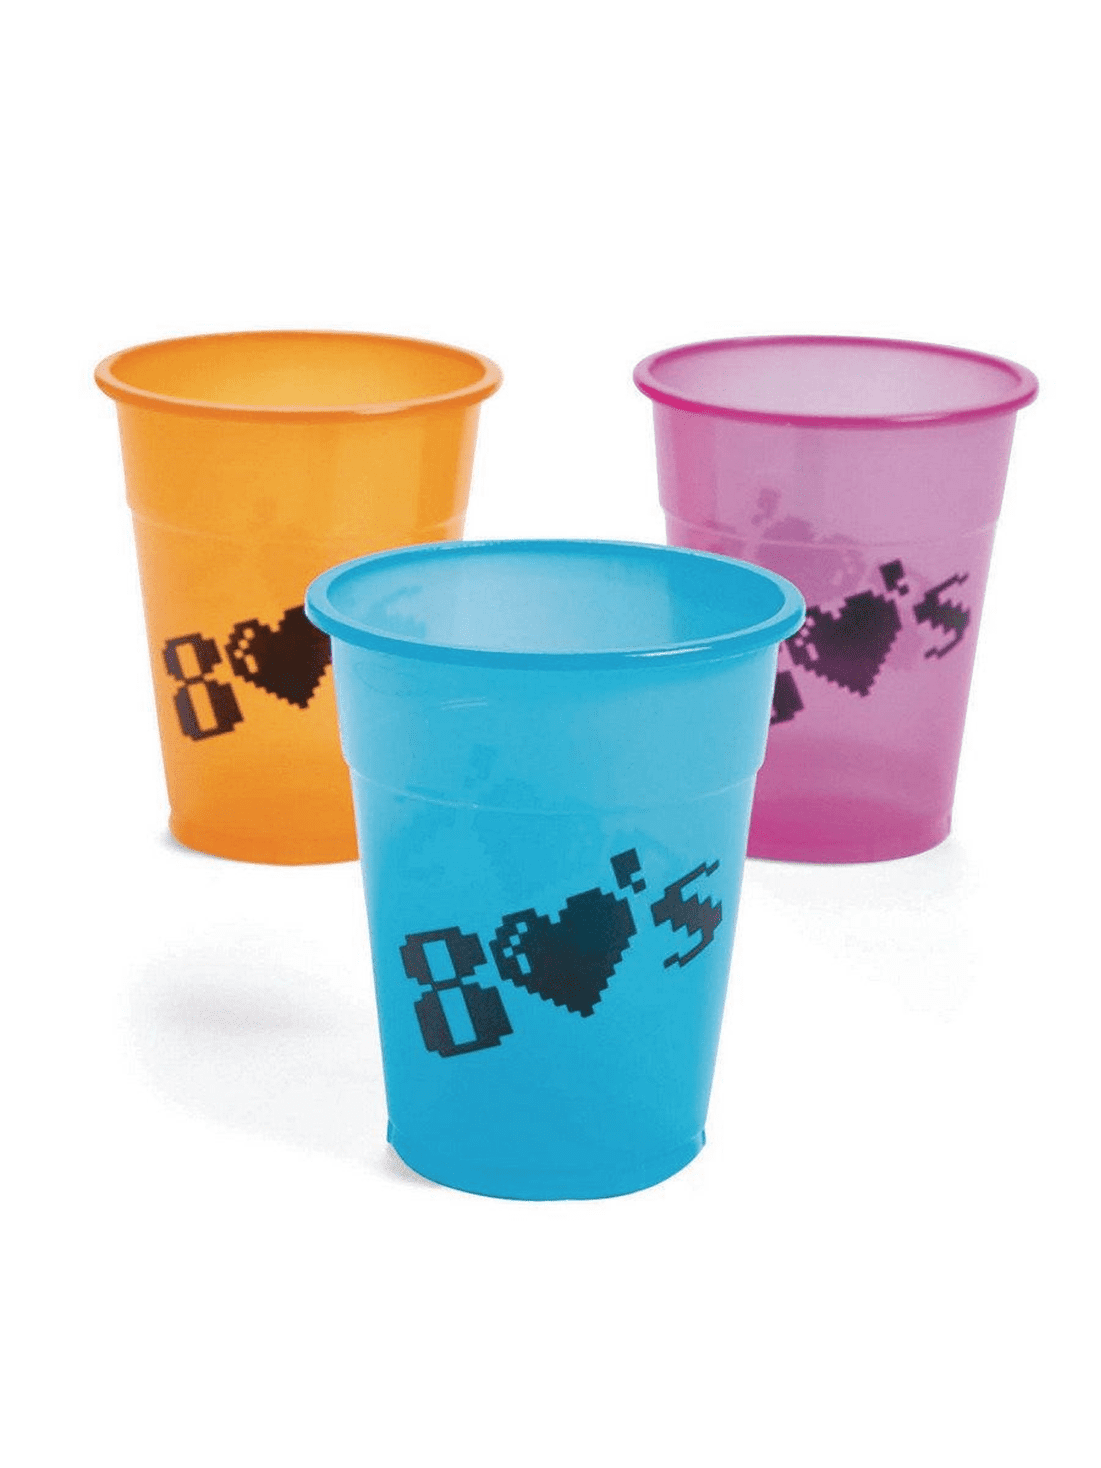 25pc Party Supplies 70s Party Disposable Cups Party Disposable Cups Drinkware for Party Fun Express 25 Pieces